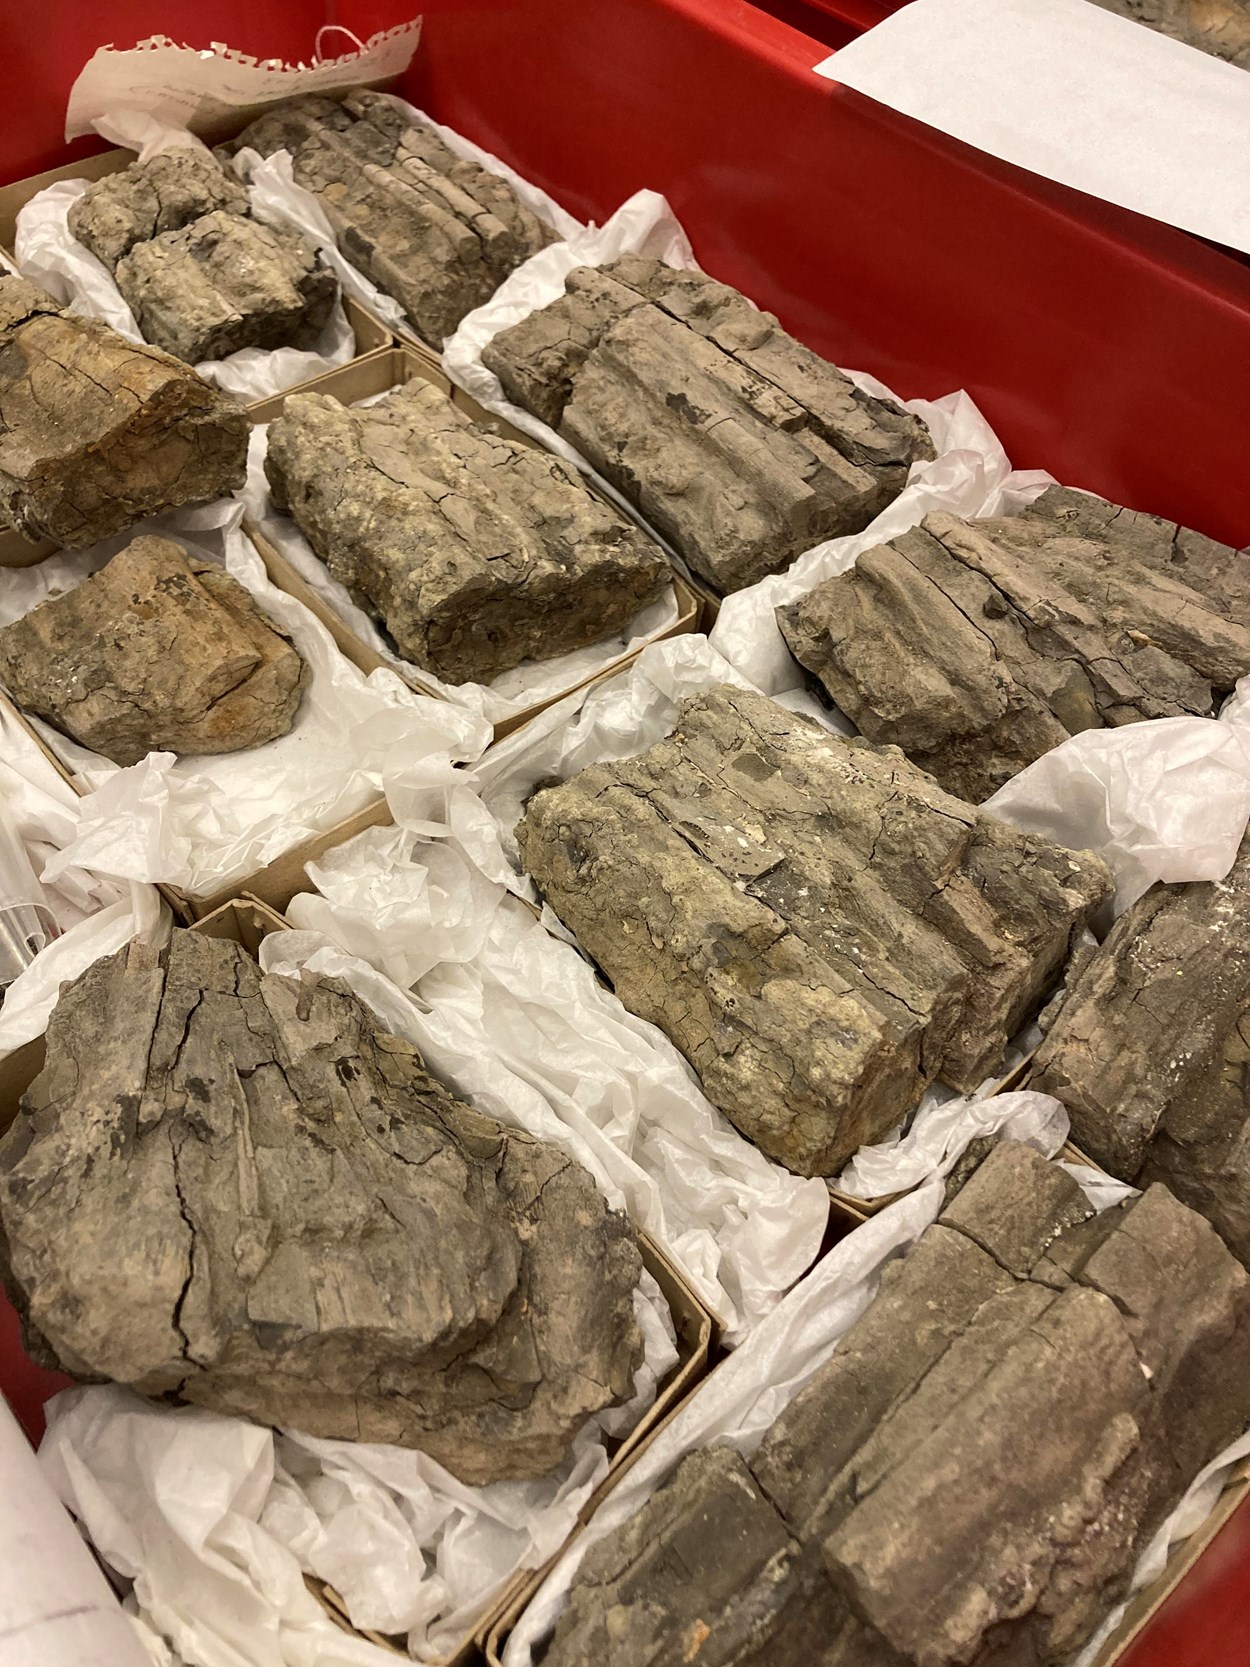 Fossil find: The impressive fossilised remains of an Ichthyosaur, found by Pauline Hoggard on a beach in Whitby in 1949 and now stored at the Leeds Discovery Centre.